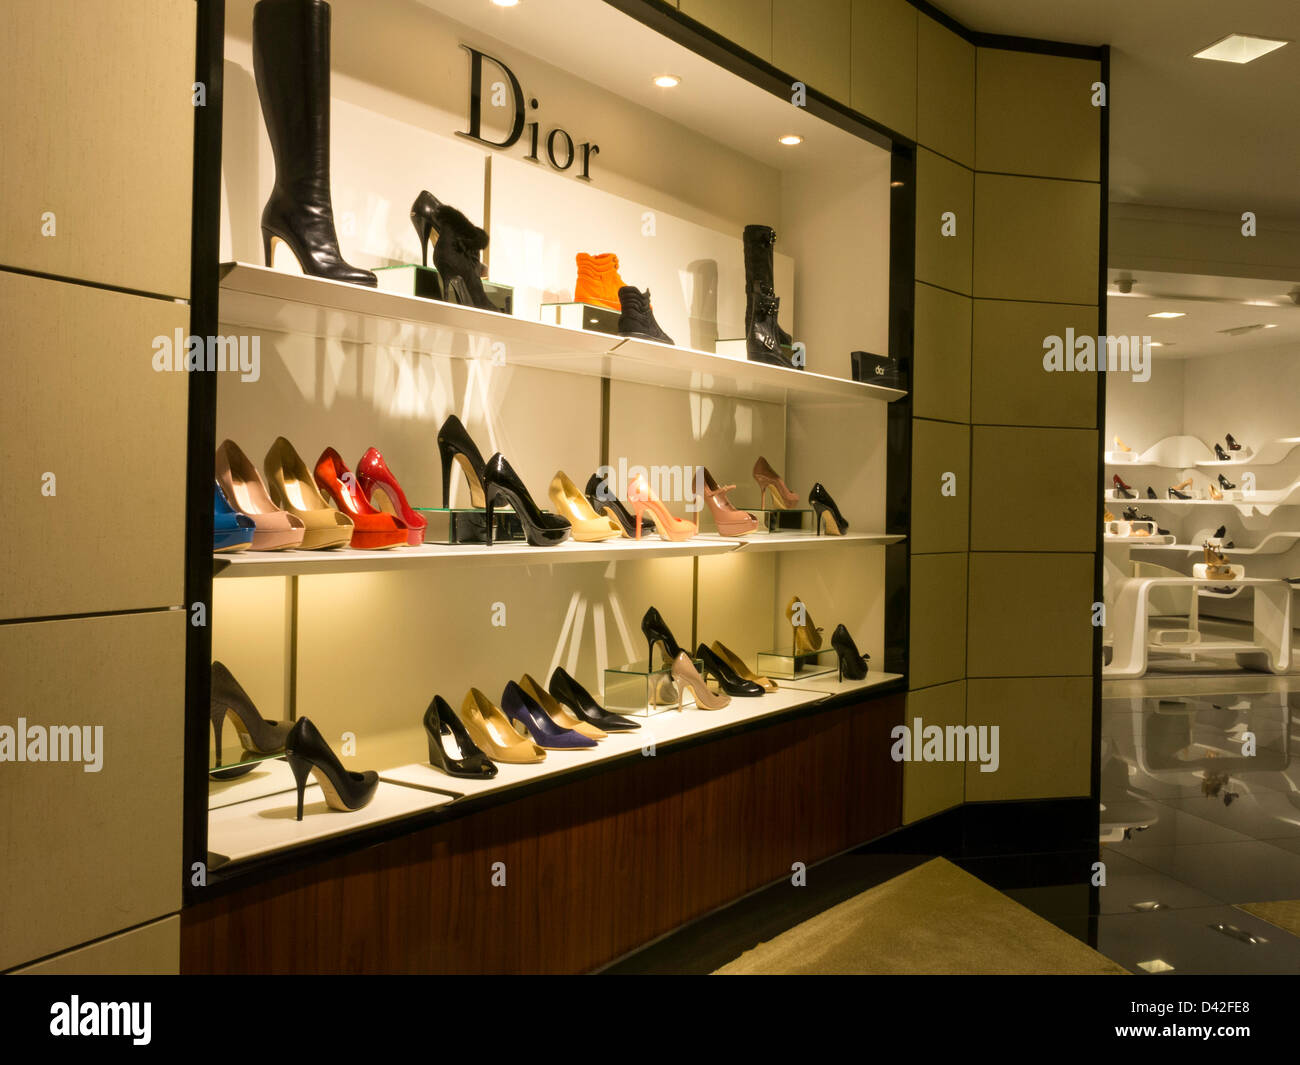 Dior Designer Shoes, Bloomingdale's Department Store Interior, NYC ...